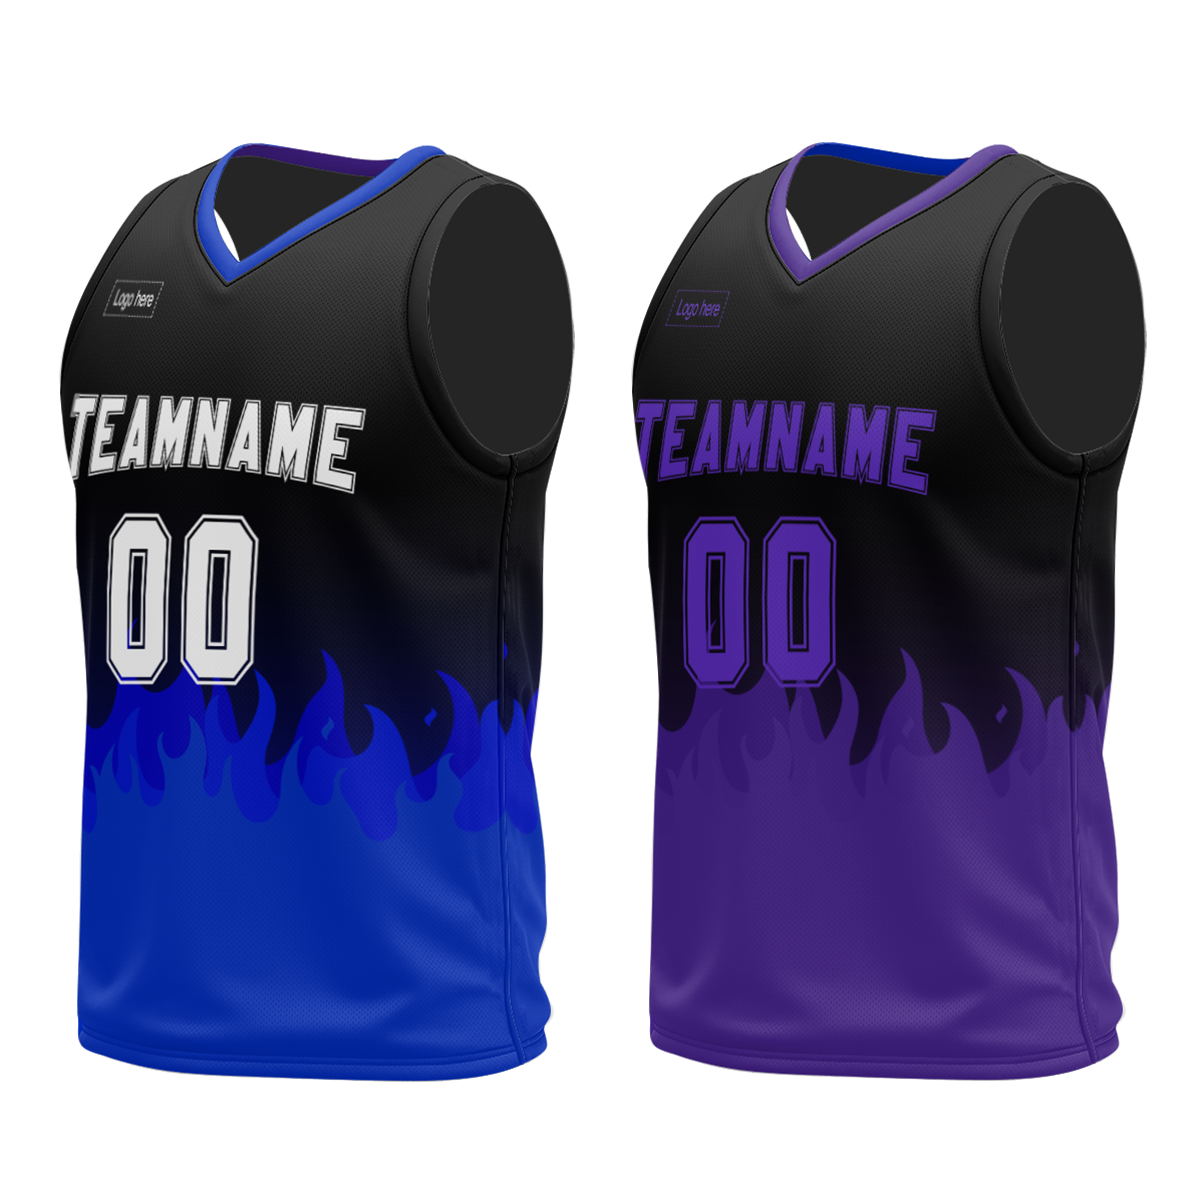 wholesales-reversible-basketball-jersey-custom-personalized-print-your-name-number-basketball-team-uniform-shirts-for-adult-at-cj-pod-5